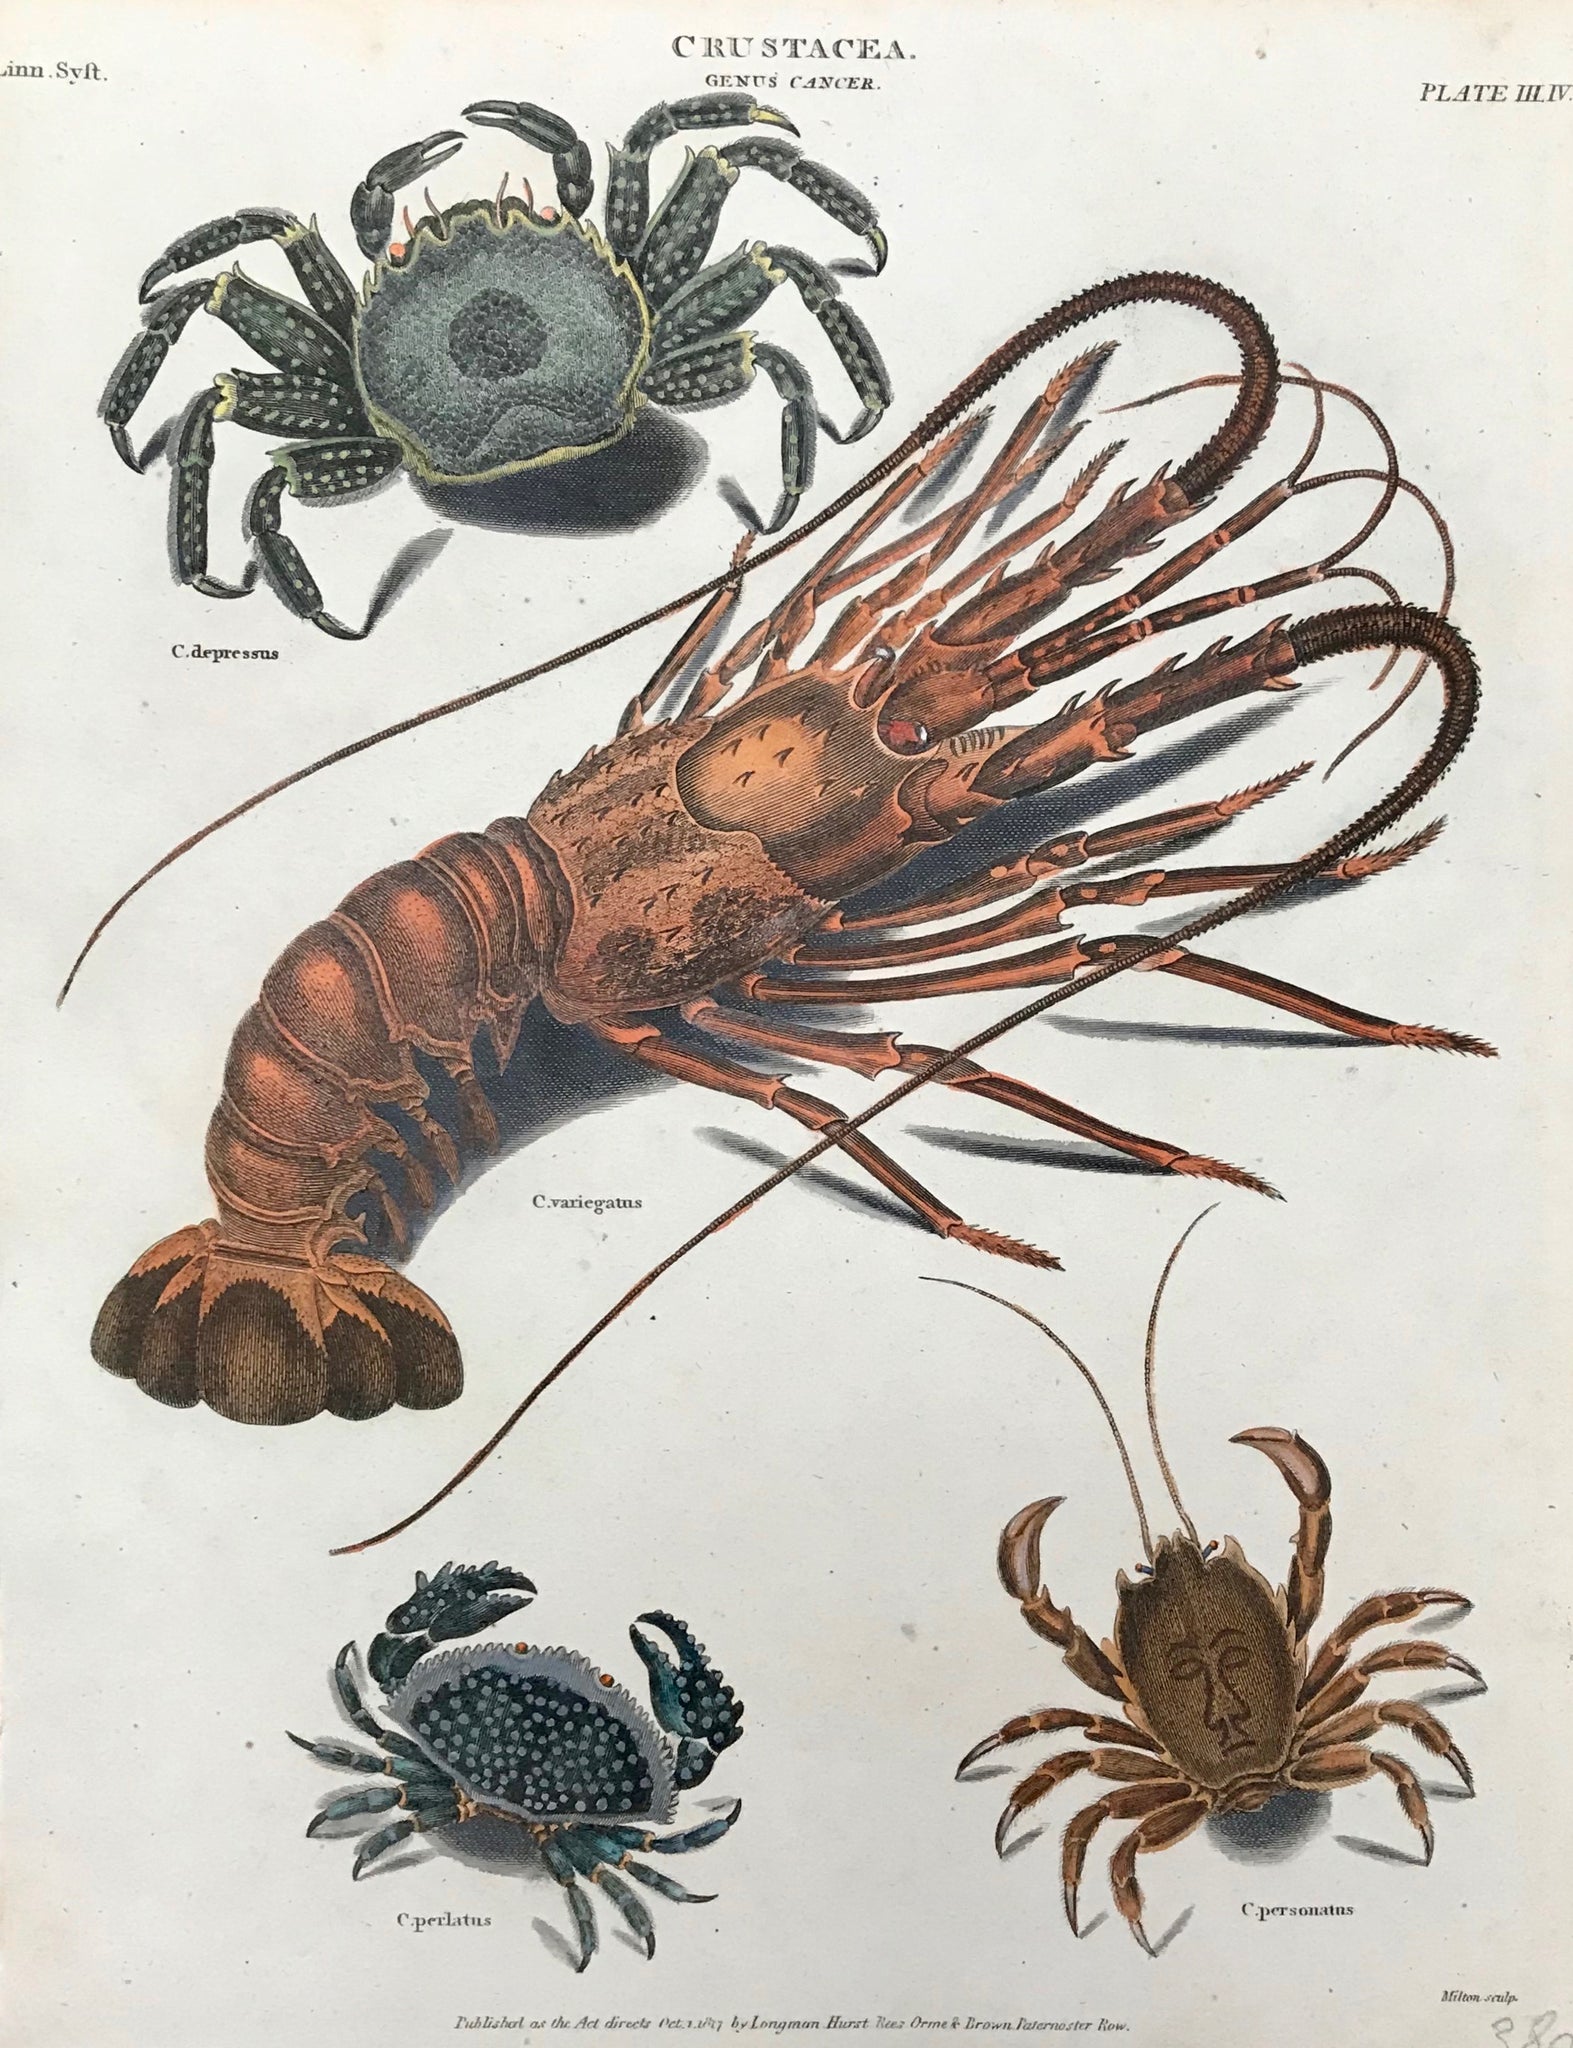 "Crustacea. Genus Cancer"  Copper engraving by Milton. Dated October 1, 1817. Attractive hand coloring. Minor creases on left margin edge.